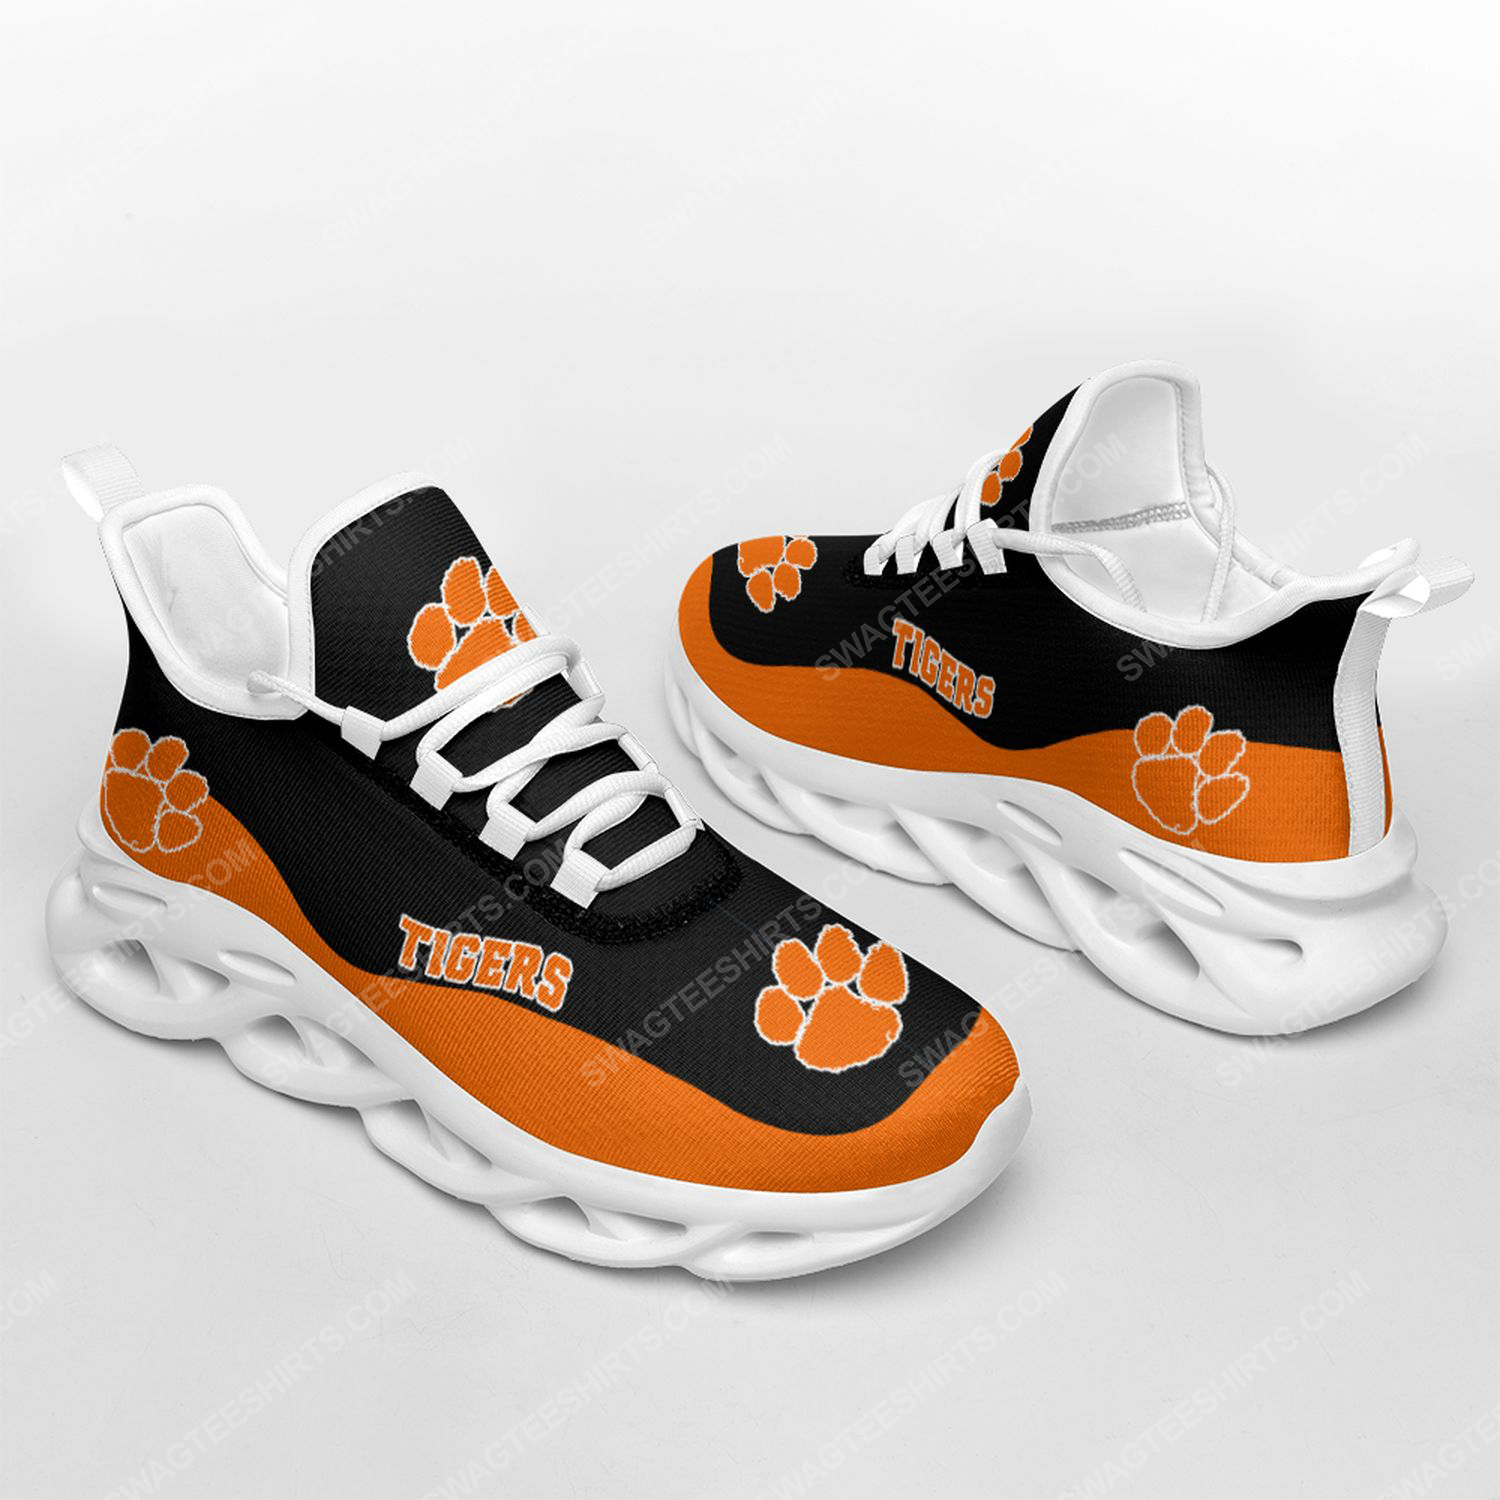 [special edition] The clemson tigers football team max soul shoes – Maria